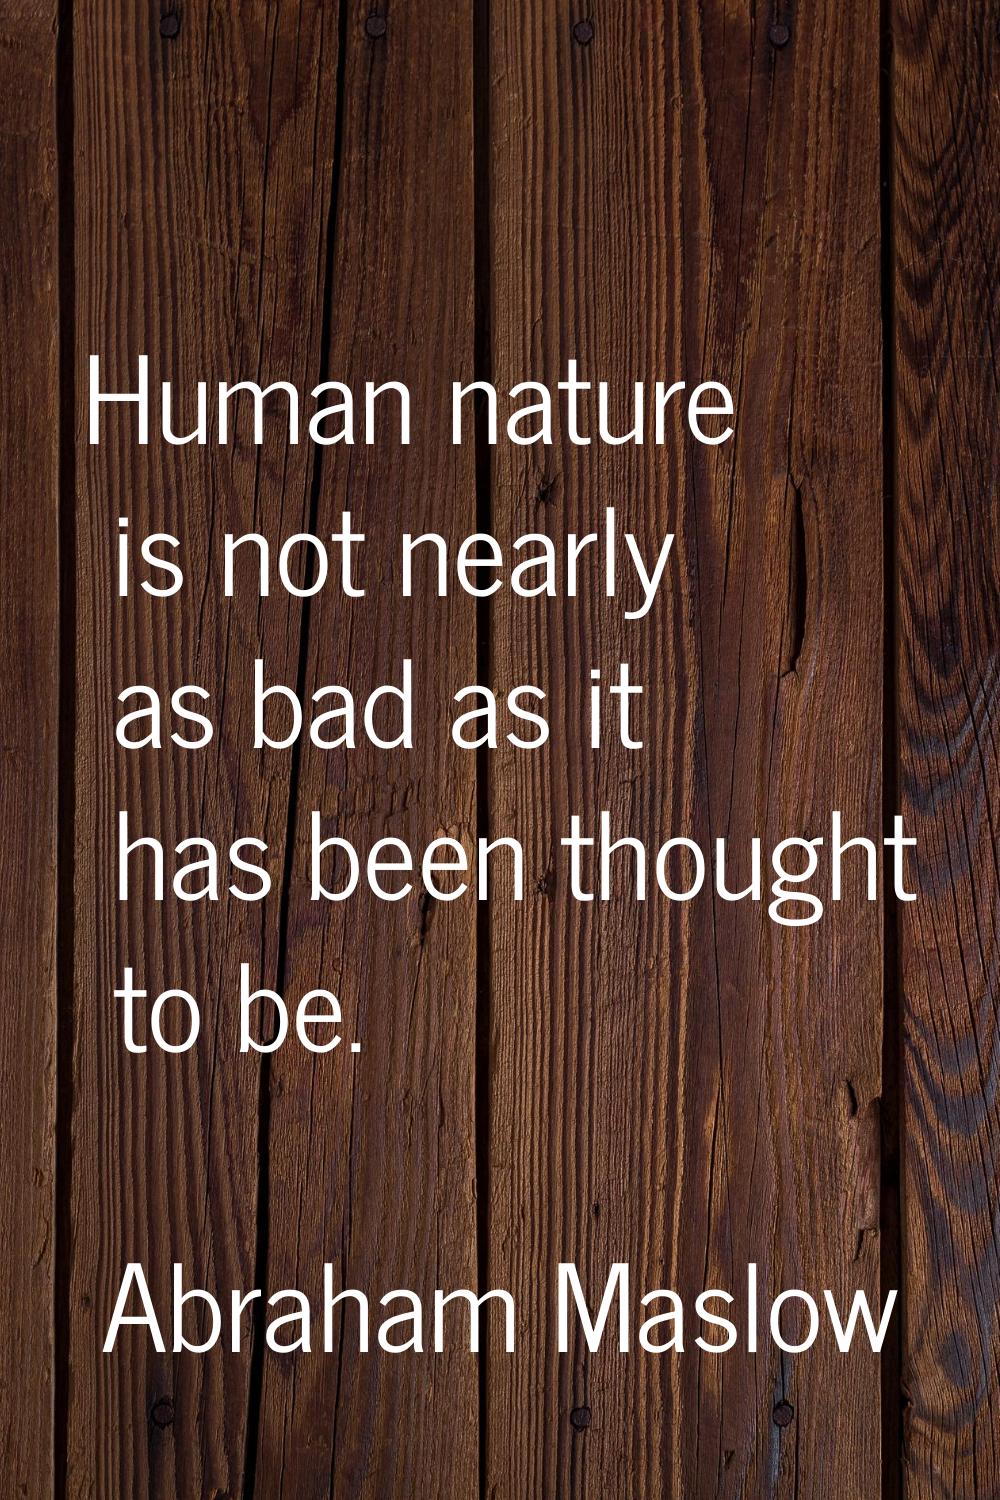 Human nature is not nearly as bad as it has been thought to be.